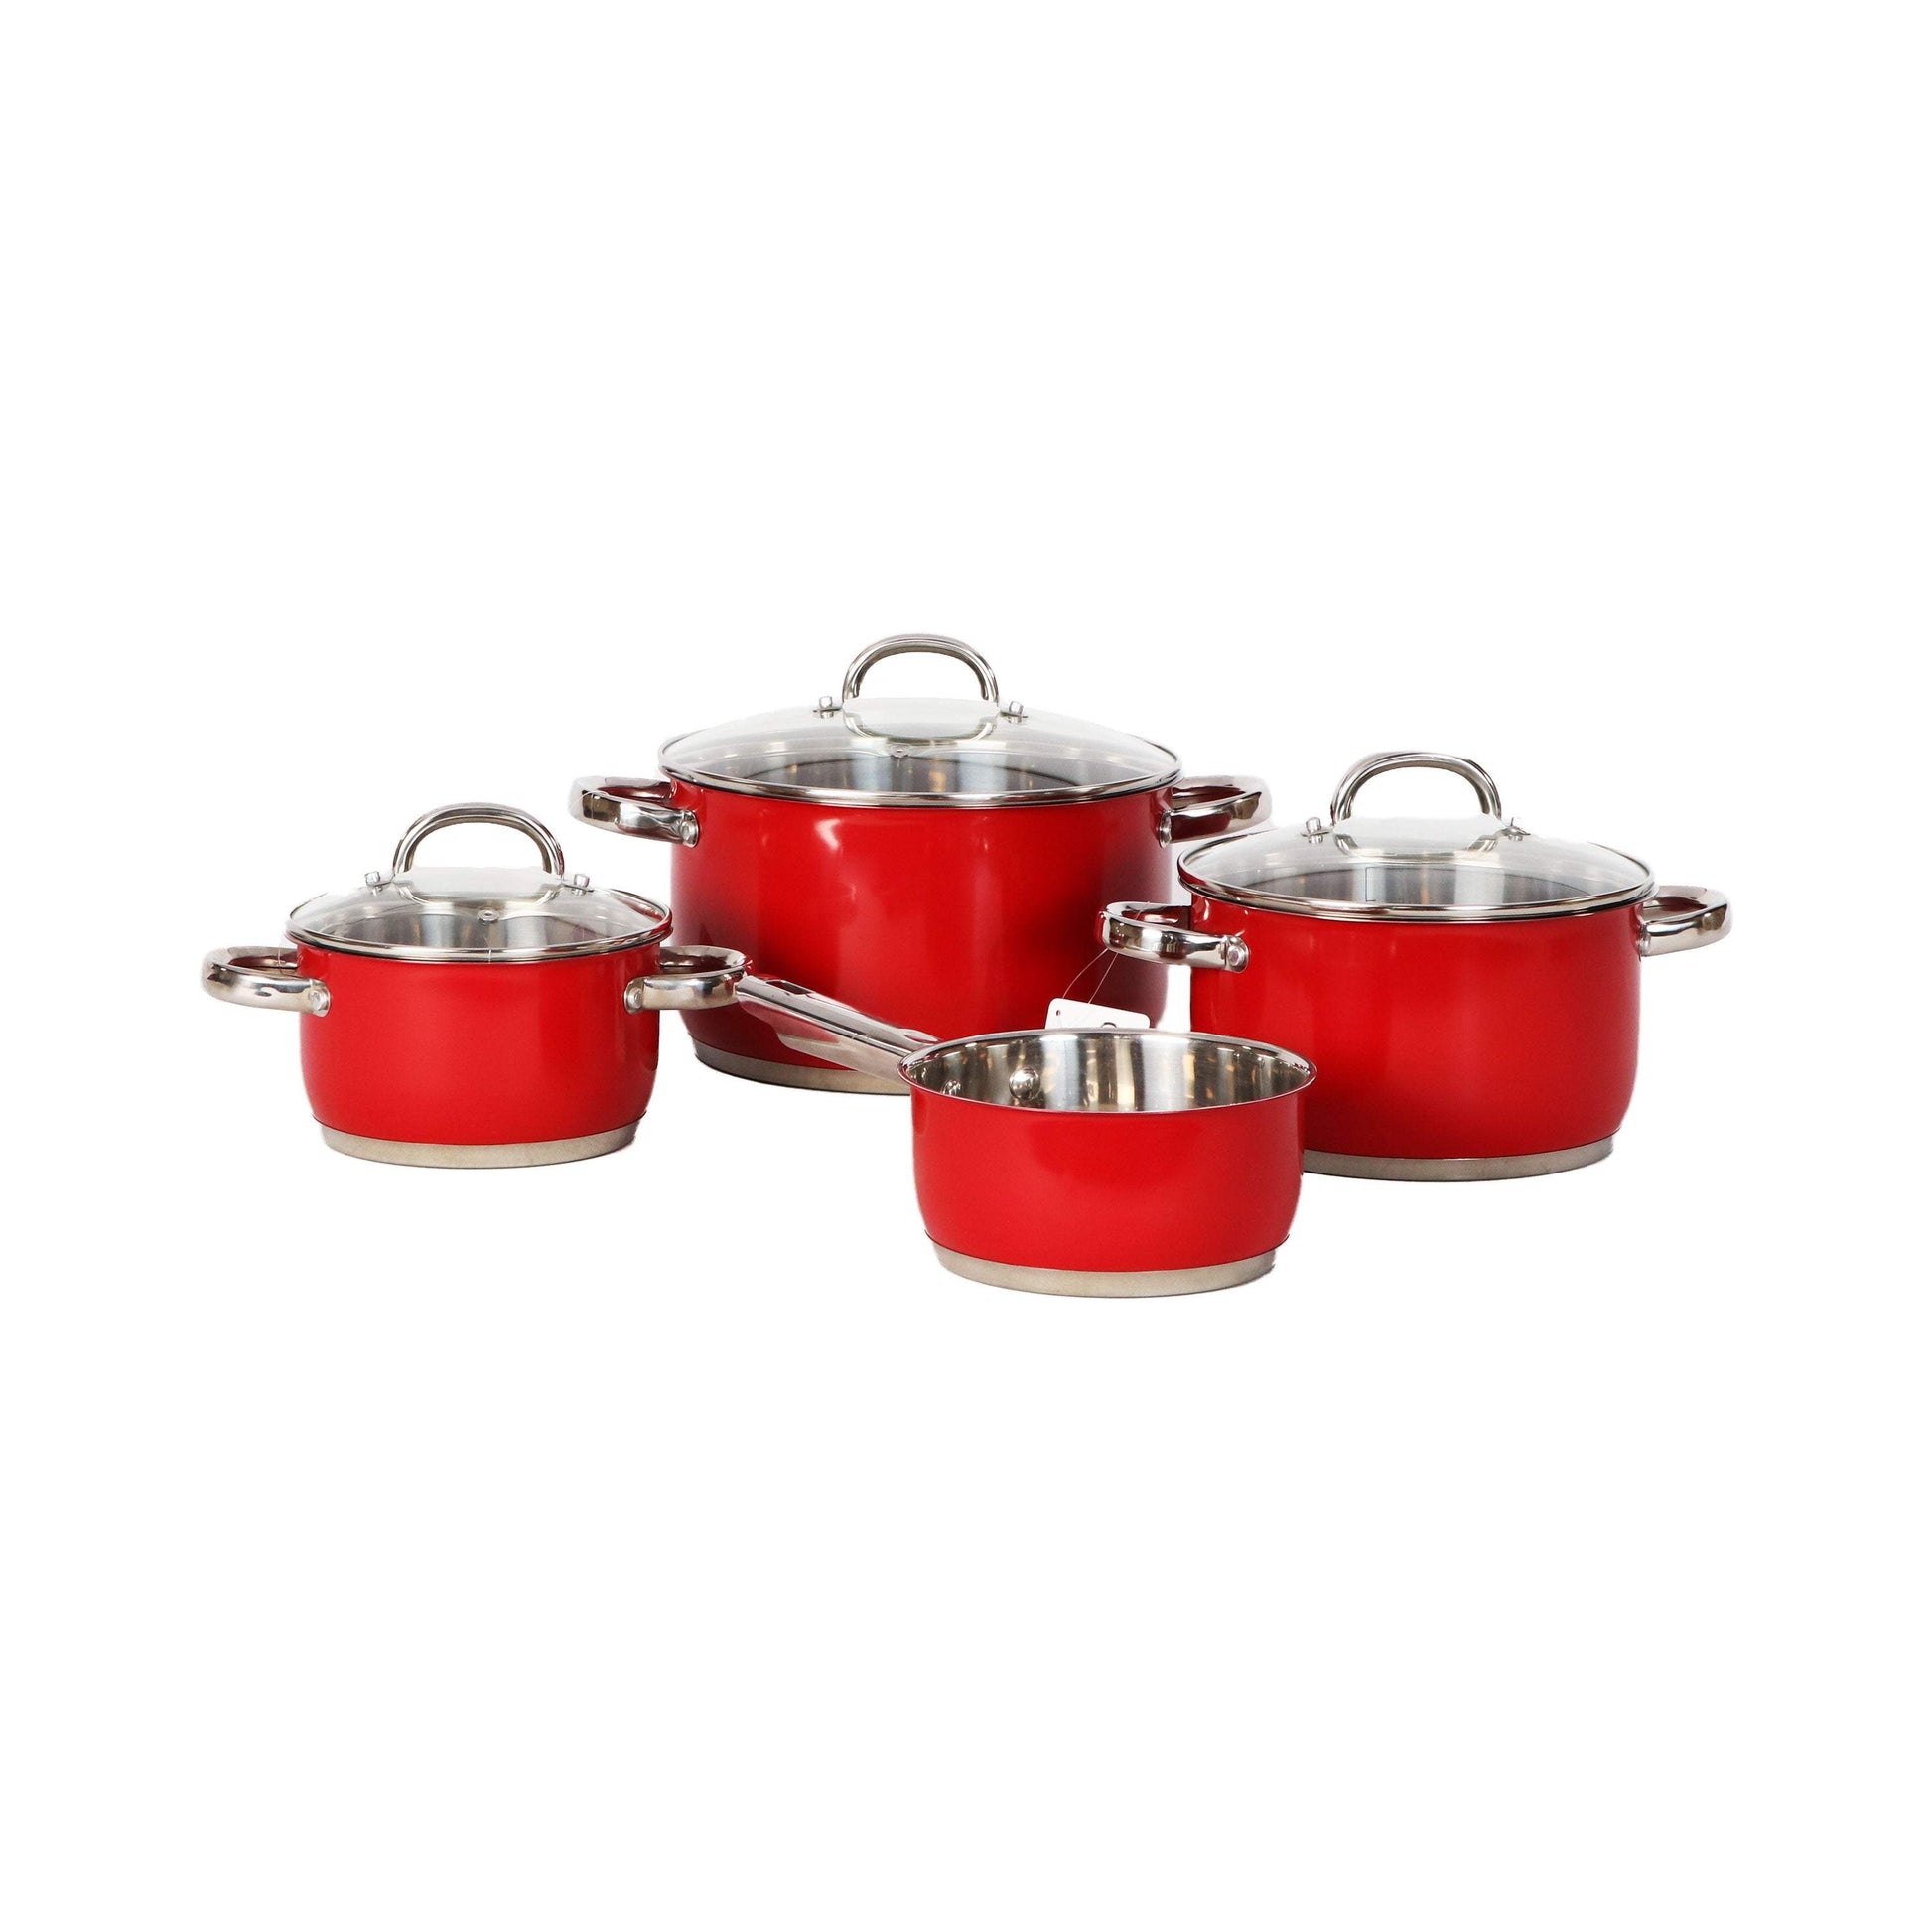 Renberg Passion Red 4-Piece Induction Saucepan Set with Glass Lid, Silargan Functional Ceramic, Induction Pots Set Nickel- Red-Royal Brands Co-